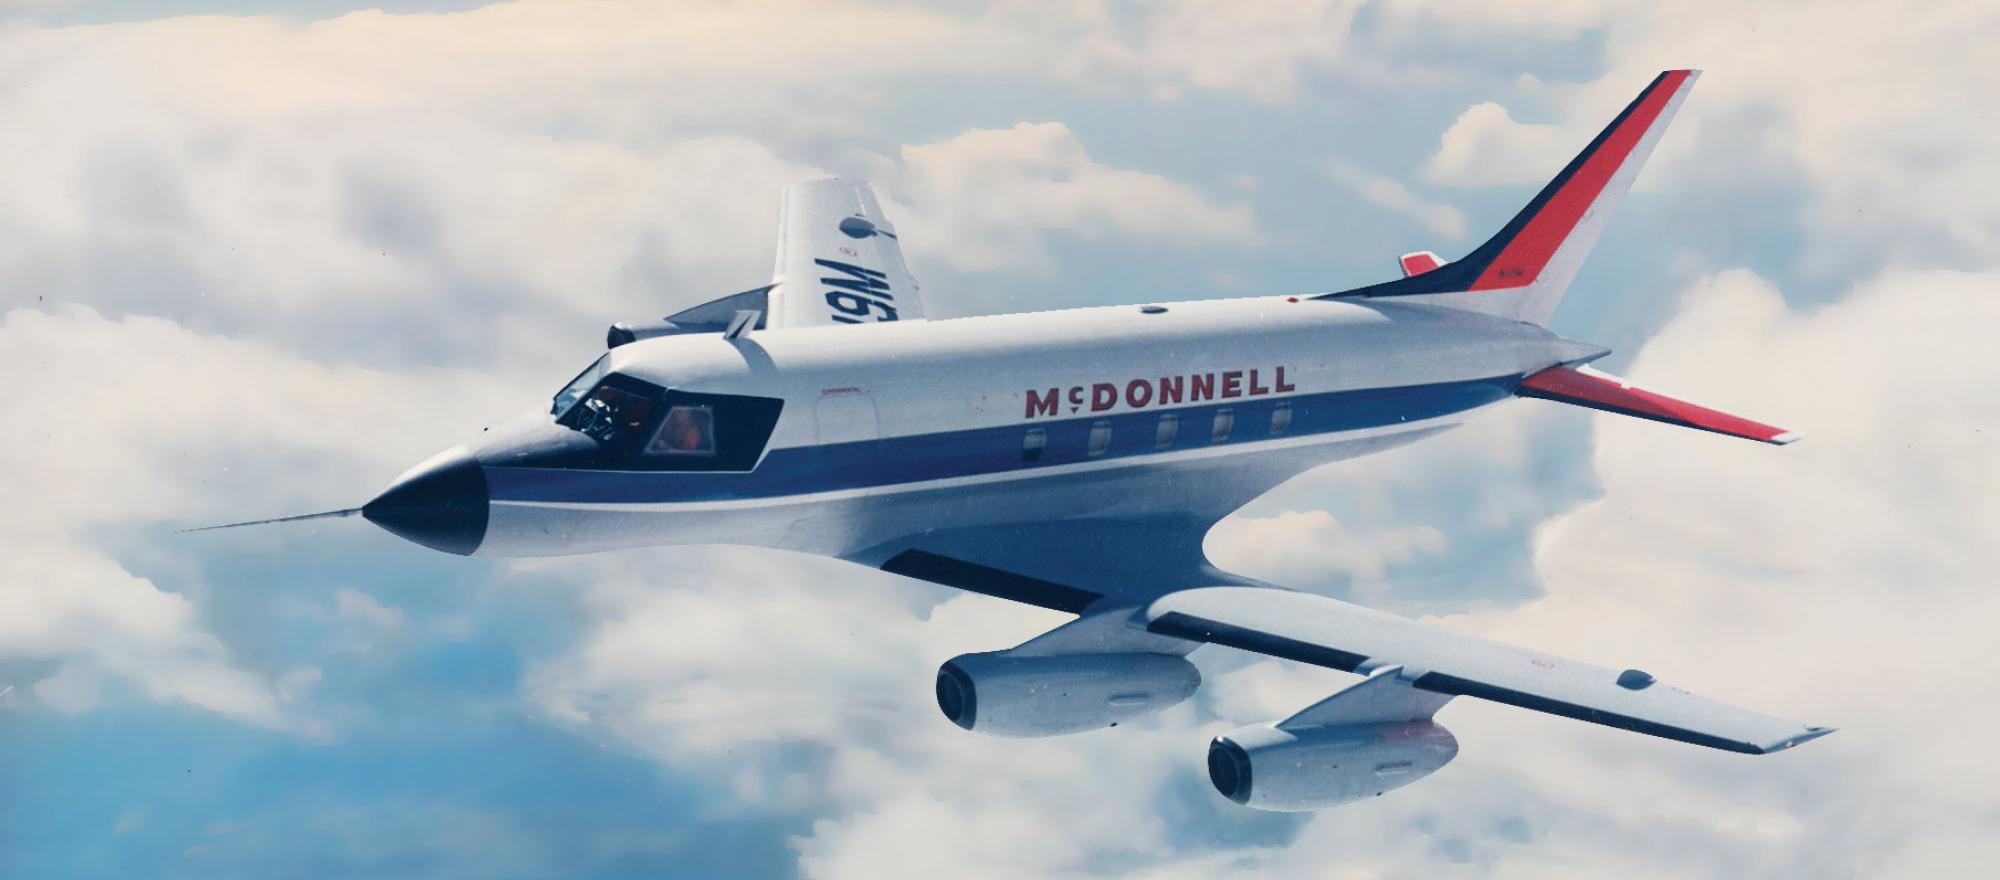 In the 1960s, McDonnell Douglas designed an unusual small jet, the four-engine Model 119. Though it received a provisional type certification, it never went into production.